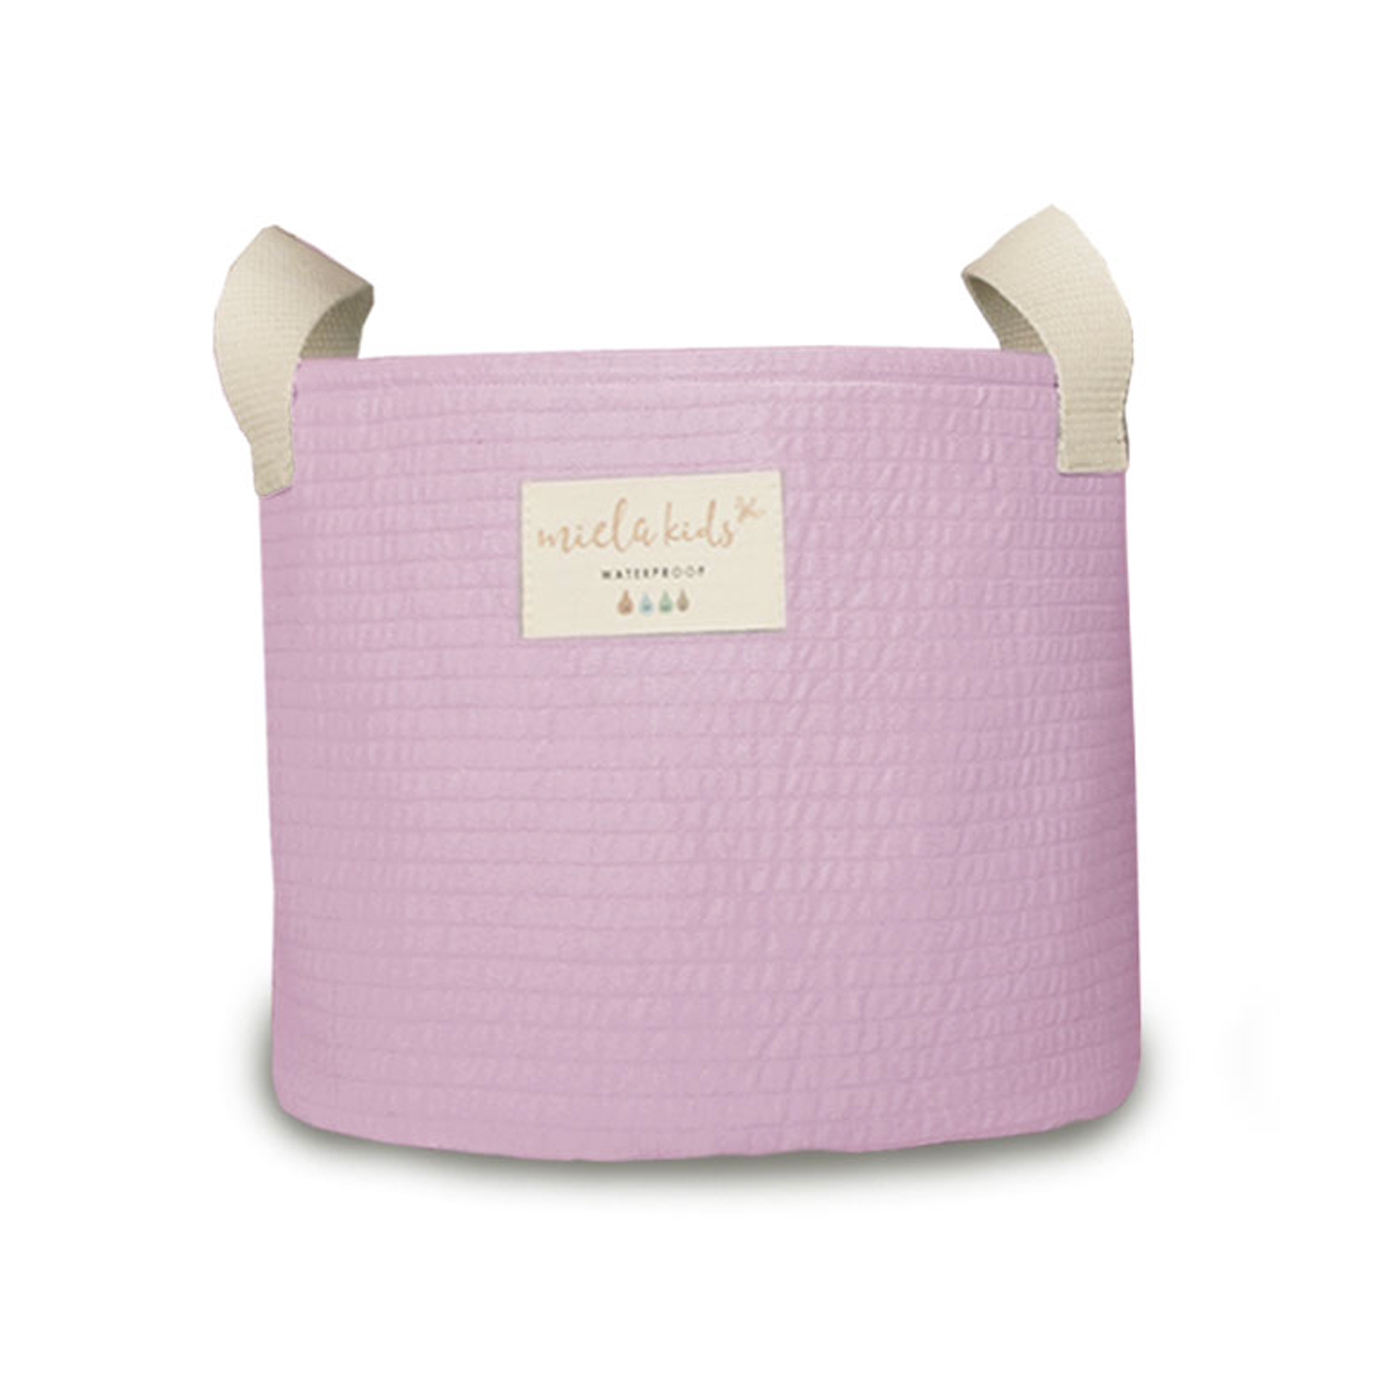  Miela Kids Quilted Organizer Basket M  | Lilac Pink